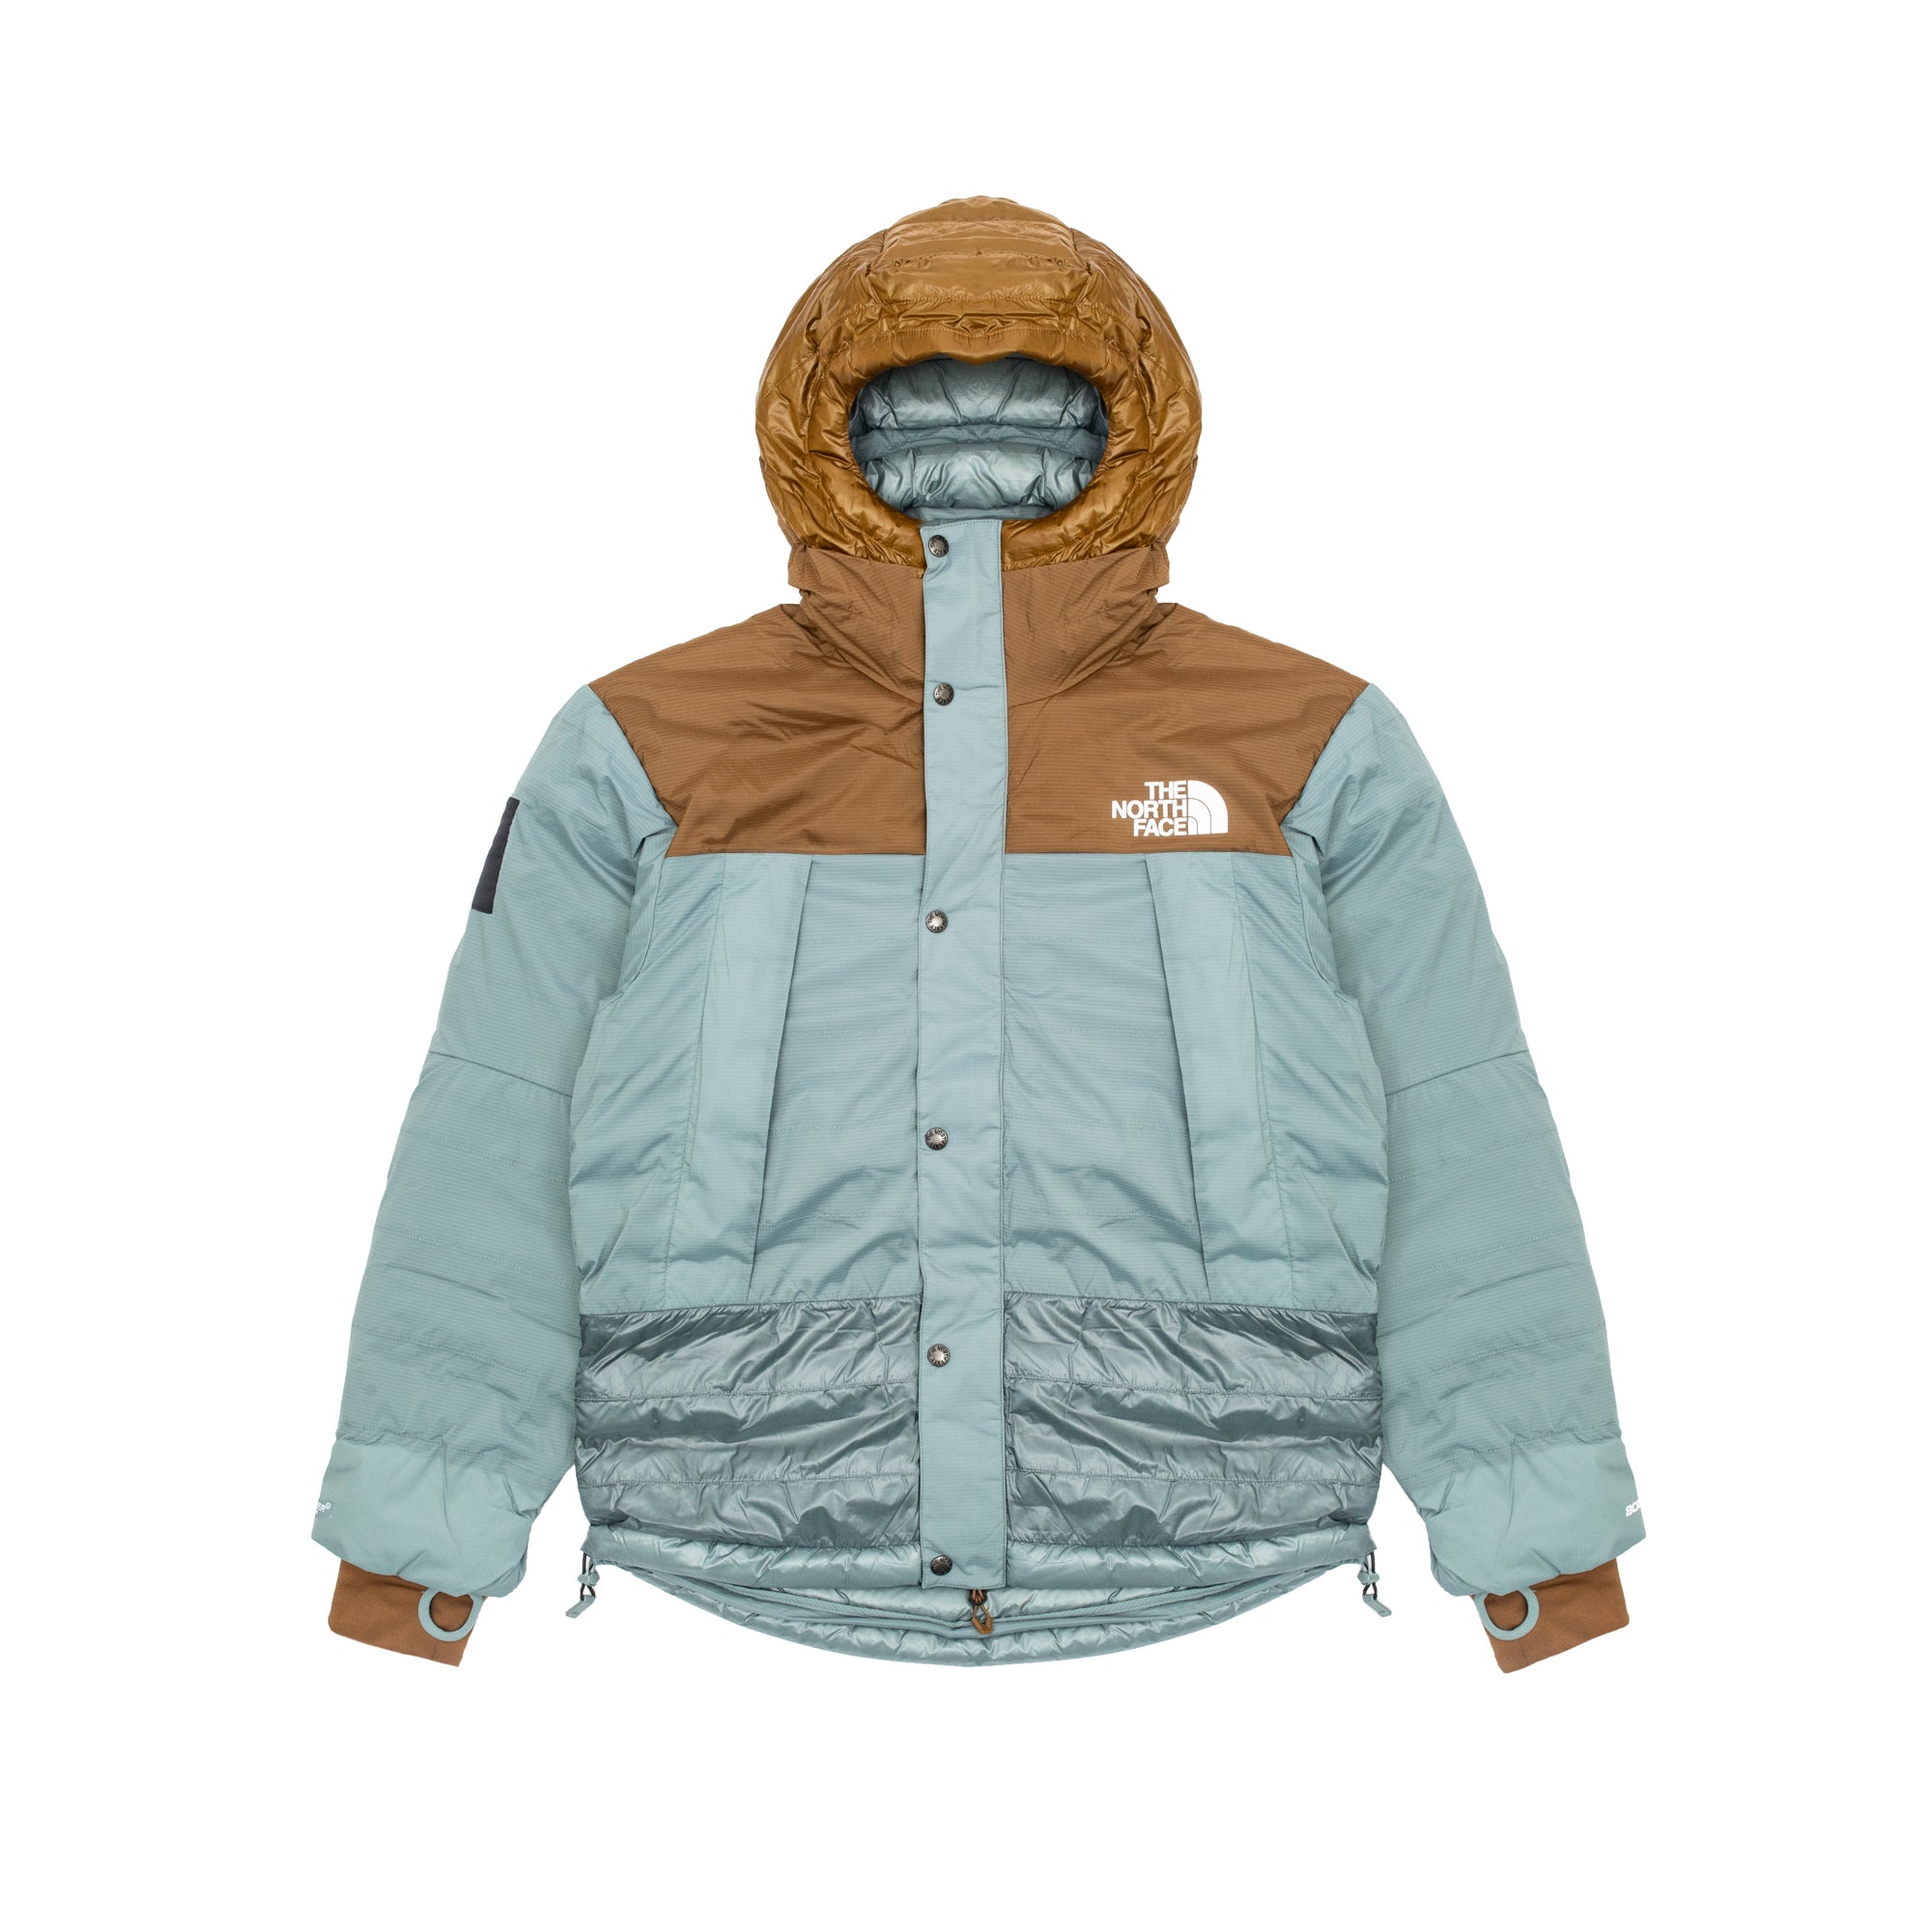 The North Face x Project U Mens 50/50 Mountain Jacket – Extra Butter